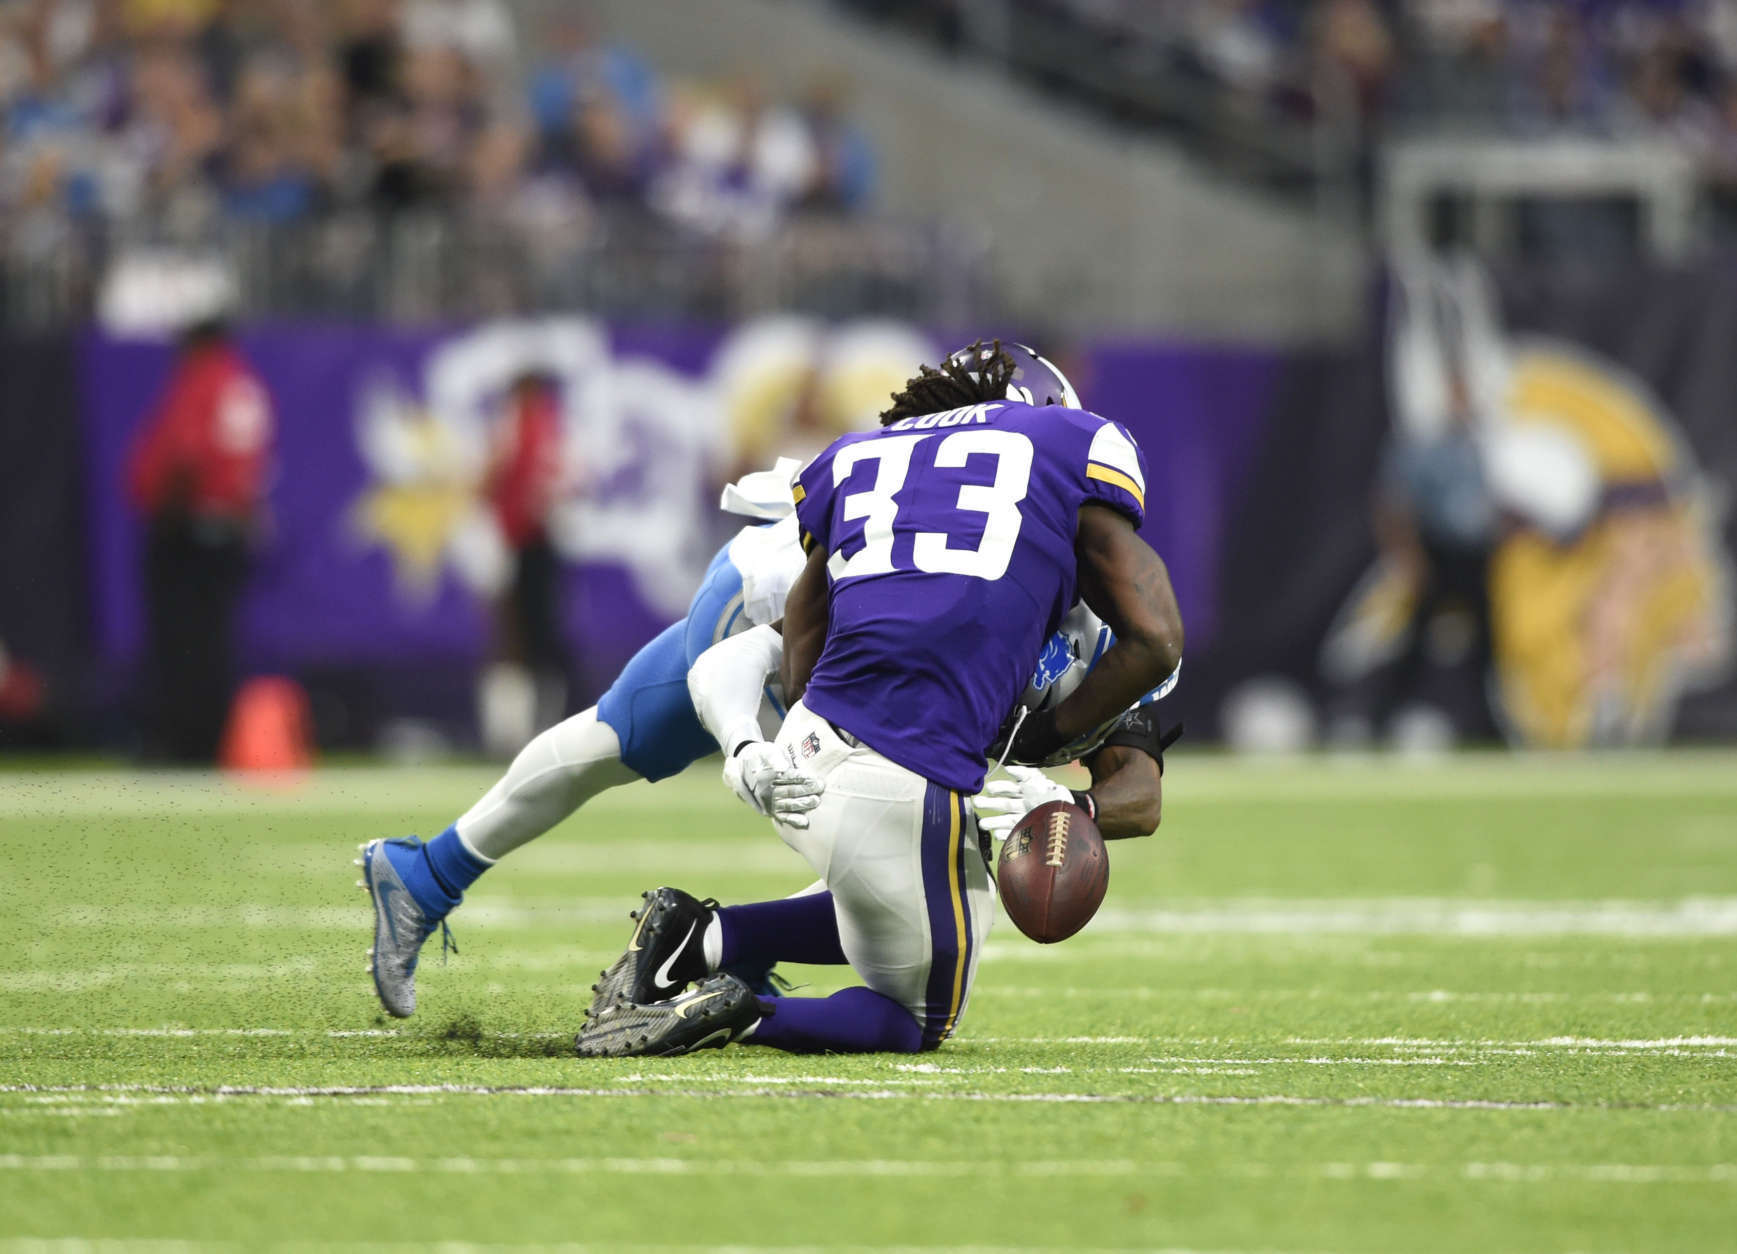 MINNEAPOLIS, MN - OCTOBER 1: Dalvin Cook #33 of the Minnesota Vikings fumbles the ball while being tackled by defender Tavon Wilson #32 of the Detroit Lions in the third quarter of the game on October 1, 2017 at U.S. Bank Stadium in Minneapolis, Minnesota. Cook was injured on the play and left the game for the locker room. (Photo by Hannah Foslien/Getty Images)